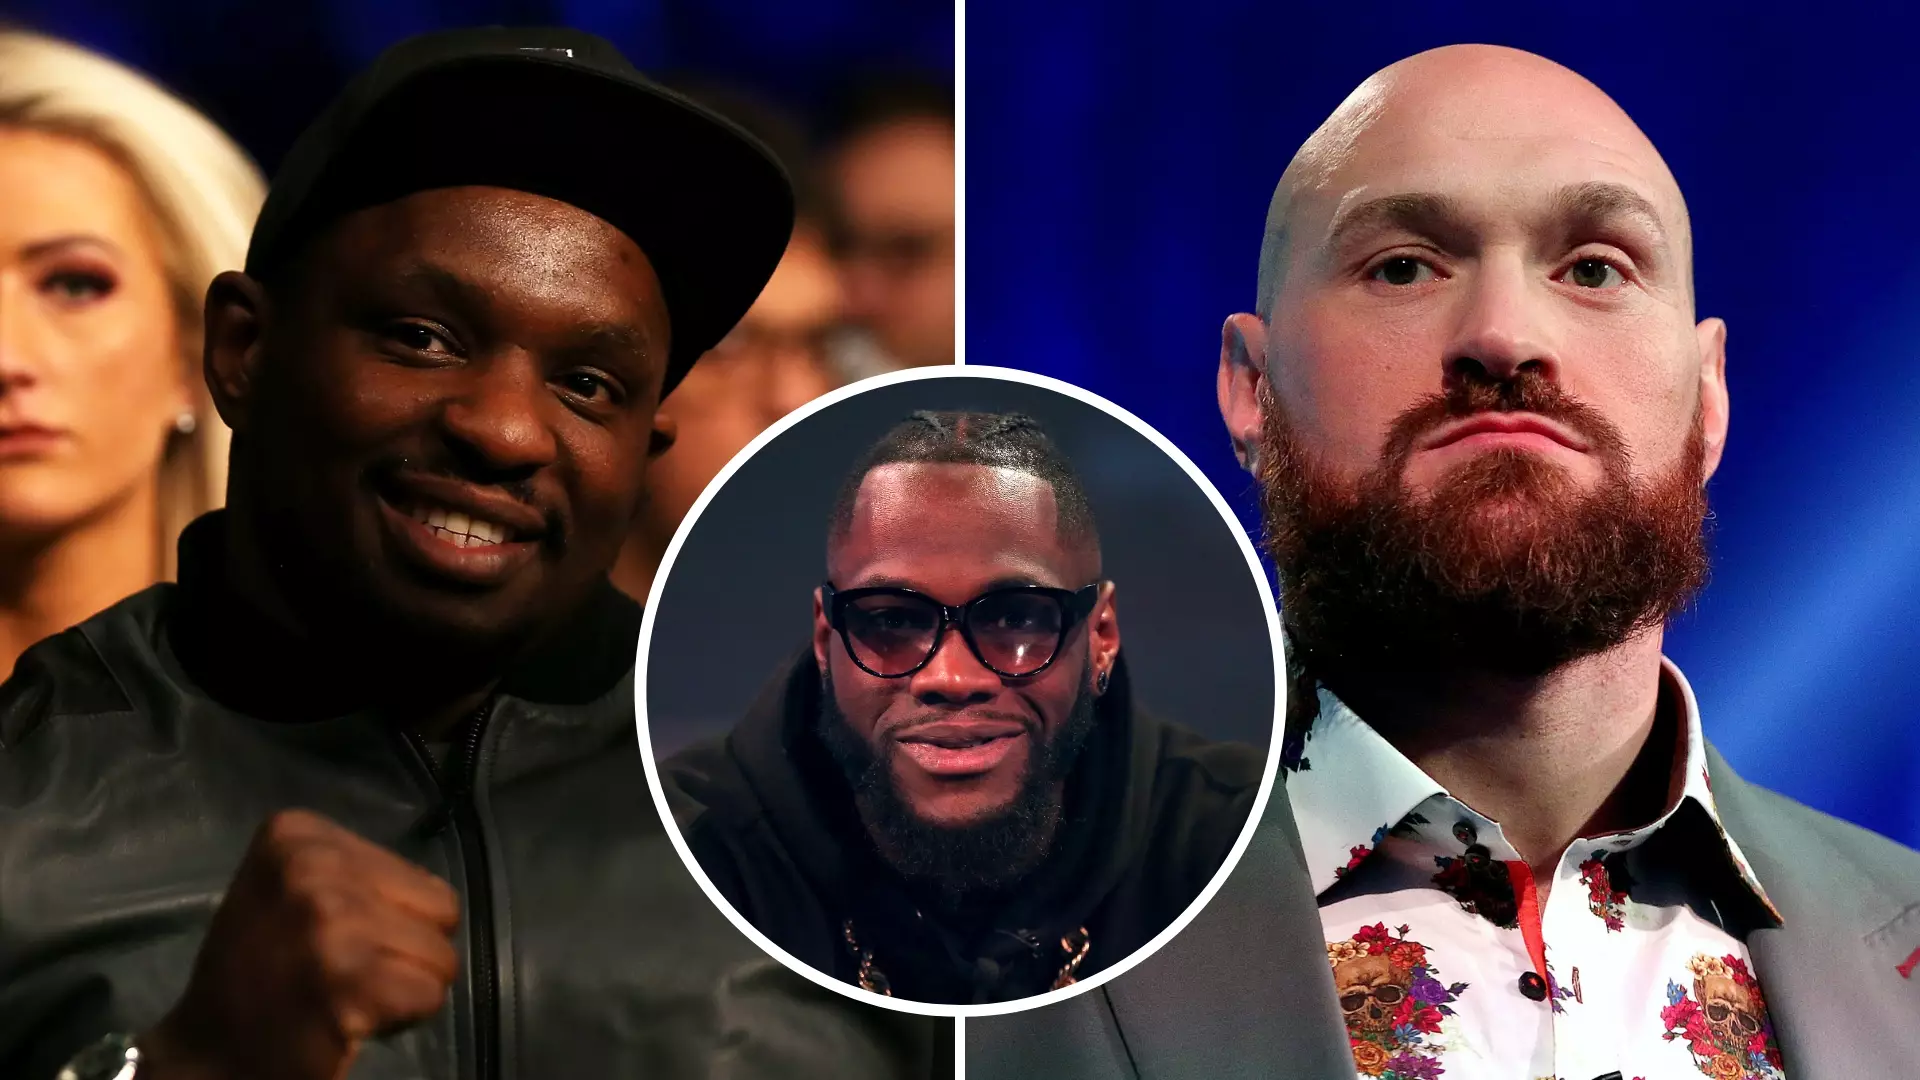 WBC Orders Tyson Fury And Dillian Whyte To Fight To Determine Deontay Wilder’s Opponent